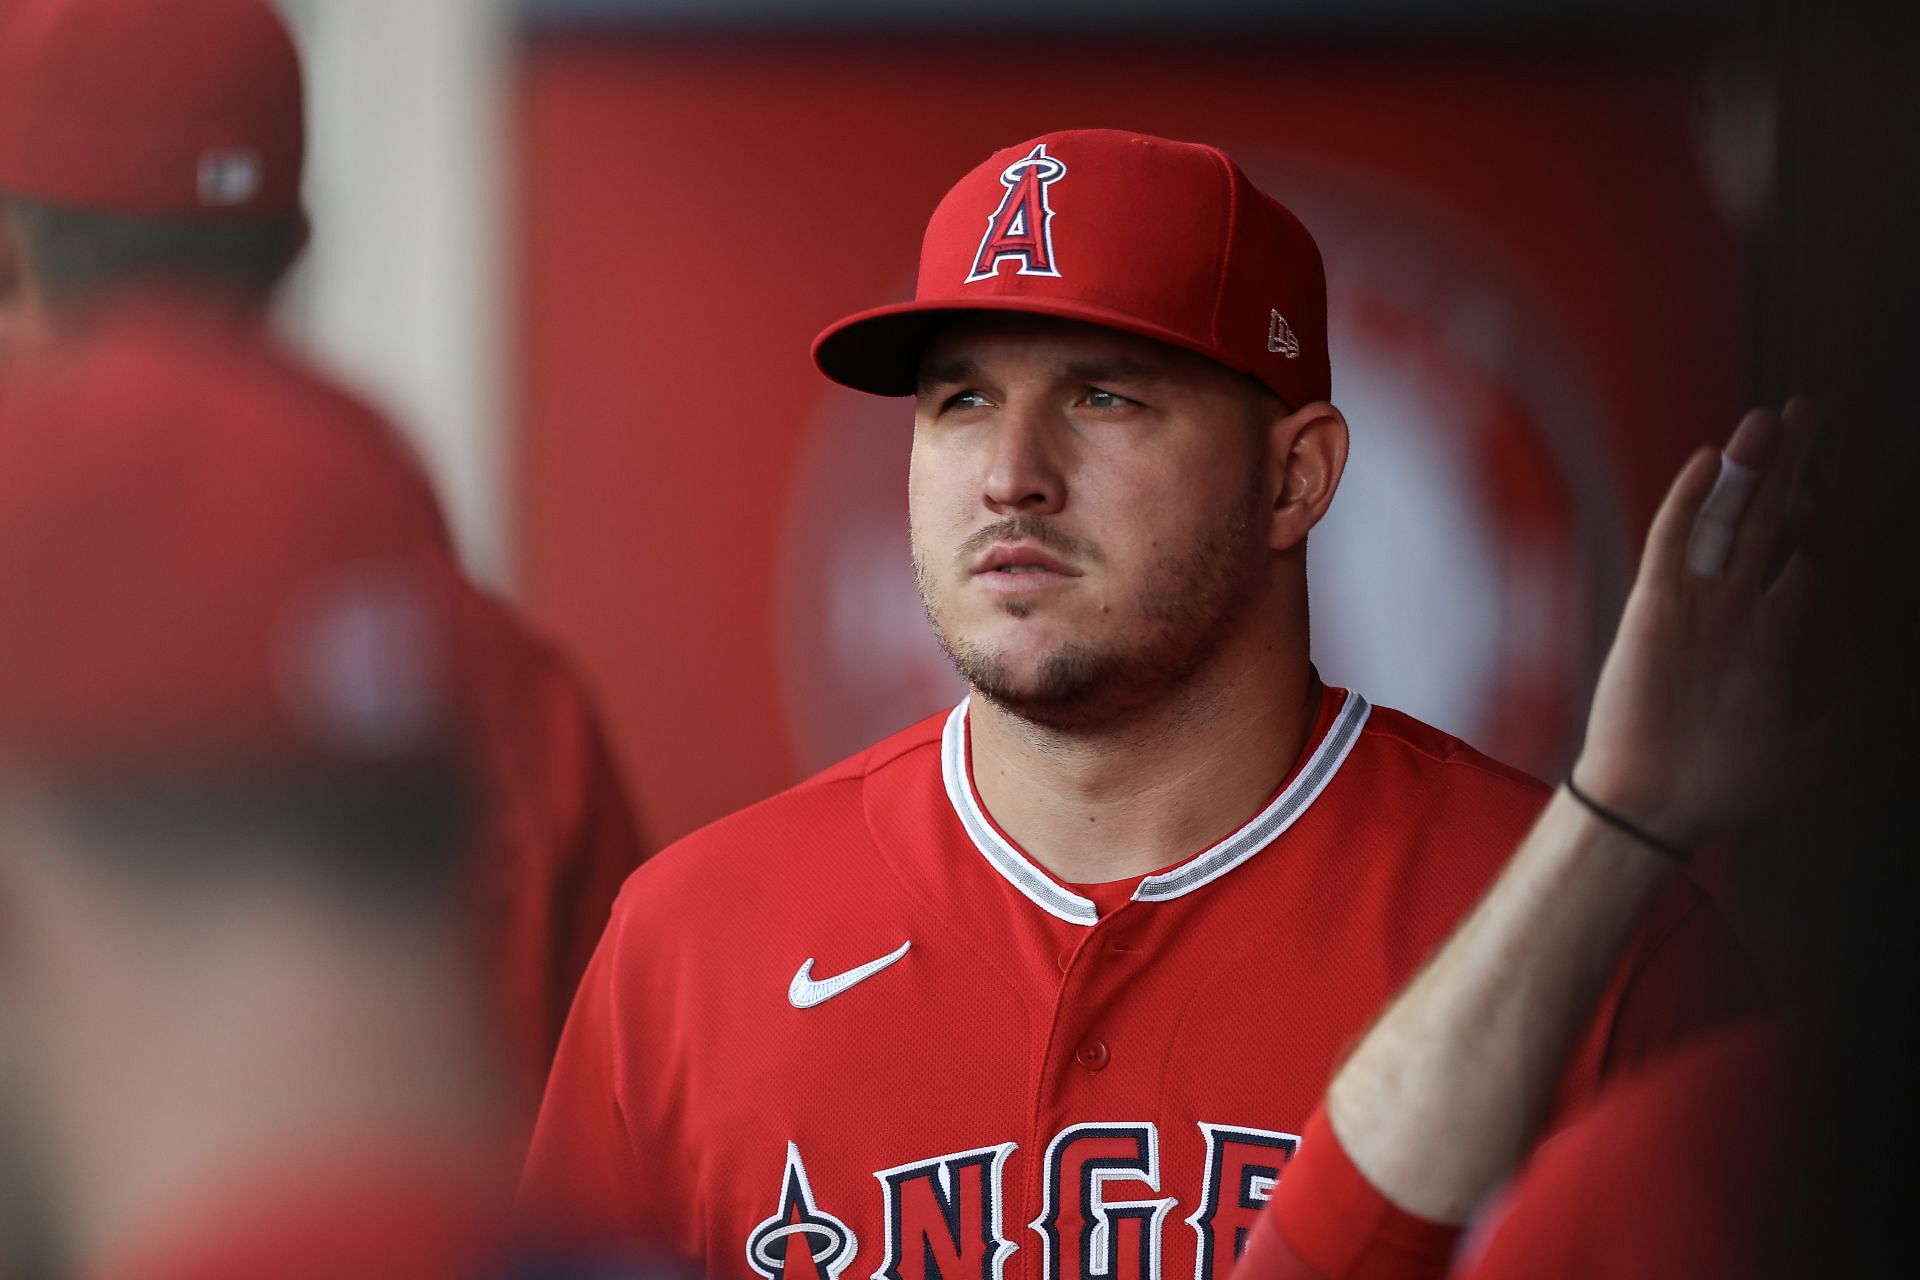 Mike Trout won't be traded